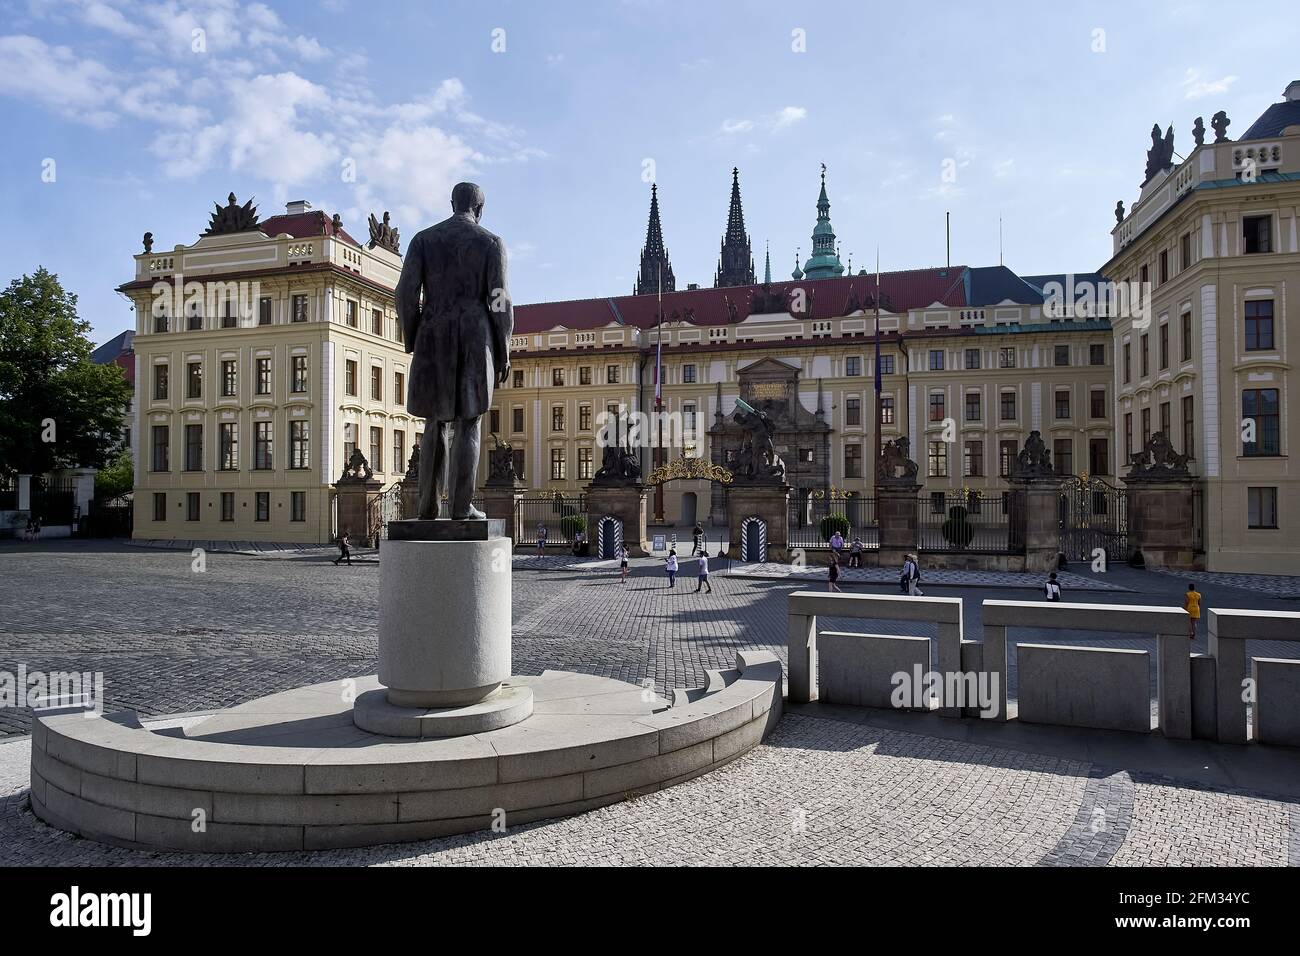 View of Tomáš Garrigue Masaryk monument and the Hradcany Square at the entrance to Prague Castle, Prague, Czech Republic Stock Photo